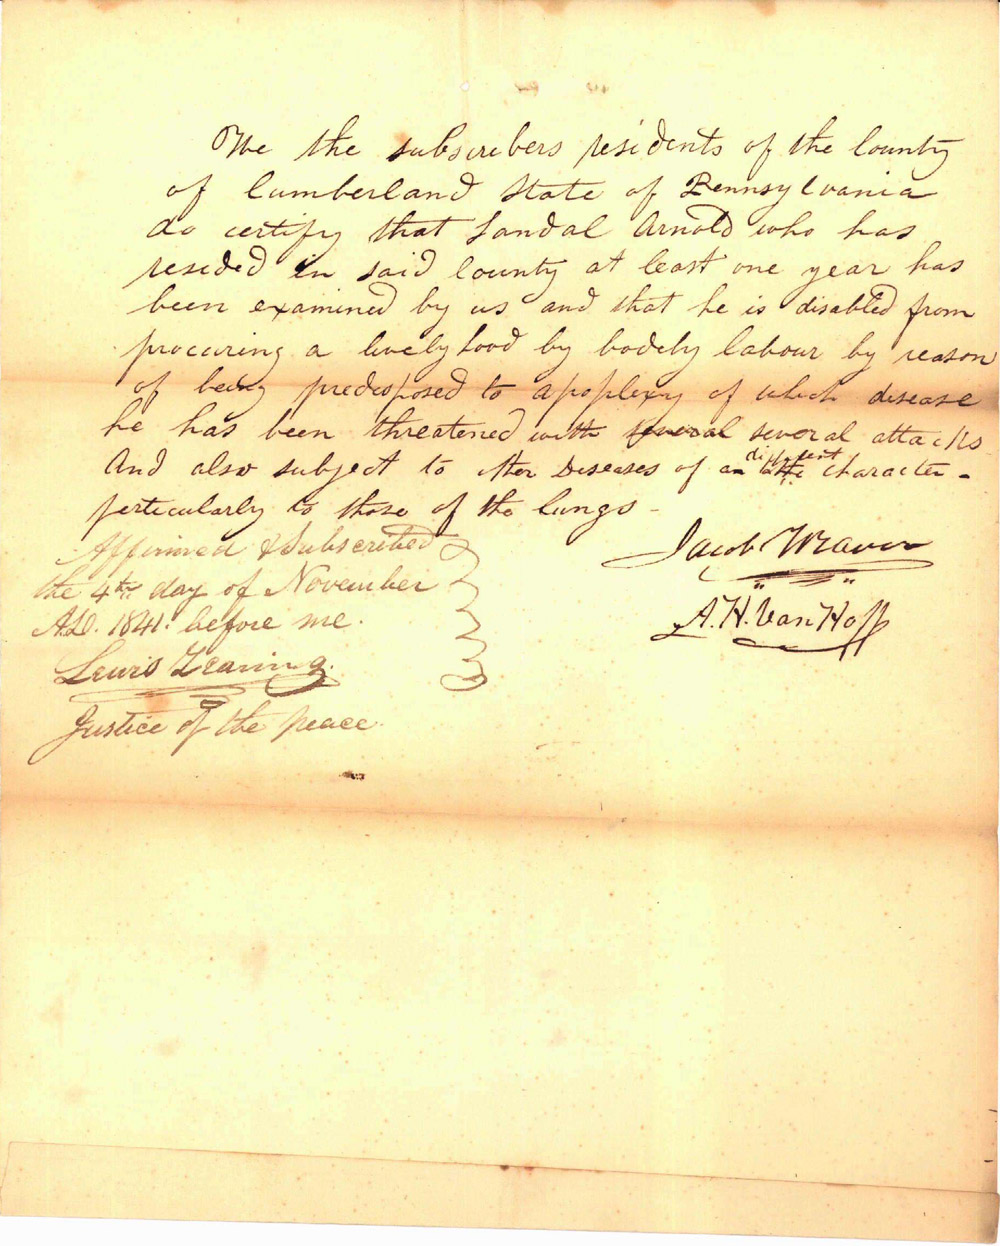 Scan of the second page of the Peddler's license issued to Sandel Arnold